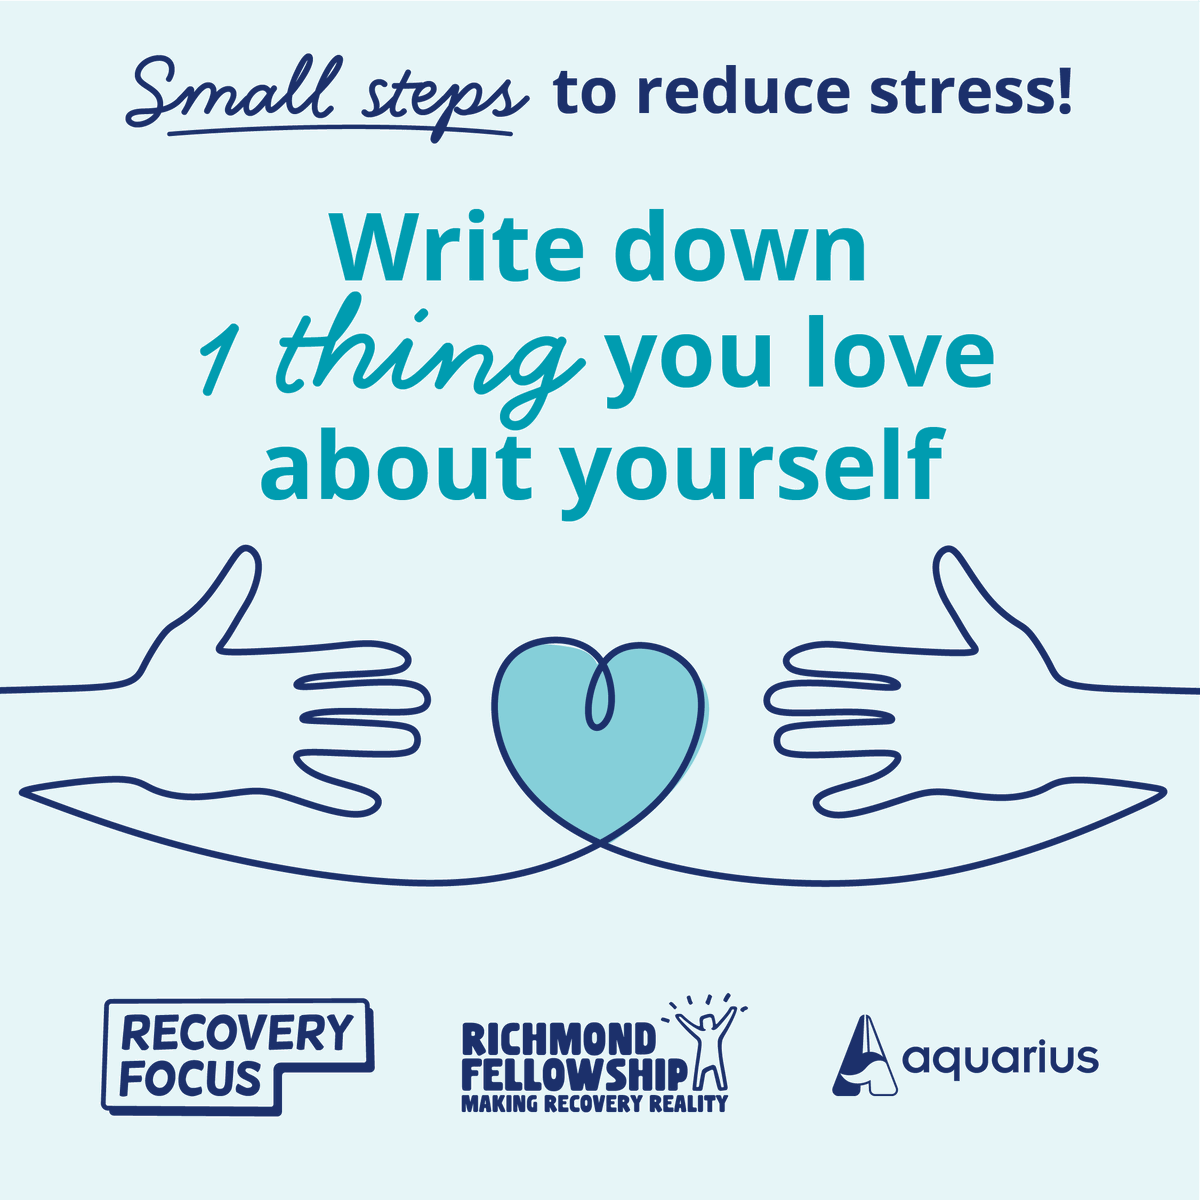 It’s easy to lose sight of everything we’ve achieved when we’re stressed. Journalling helps us to positively reframe our mindset ✍️ Start small & try journalling for just 2 minutes each day. #LittleByLittle #StressAwarenessMonth